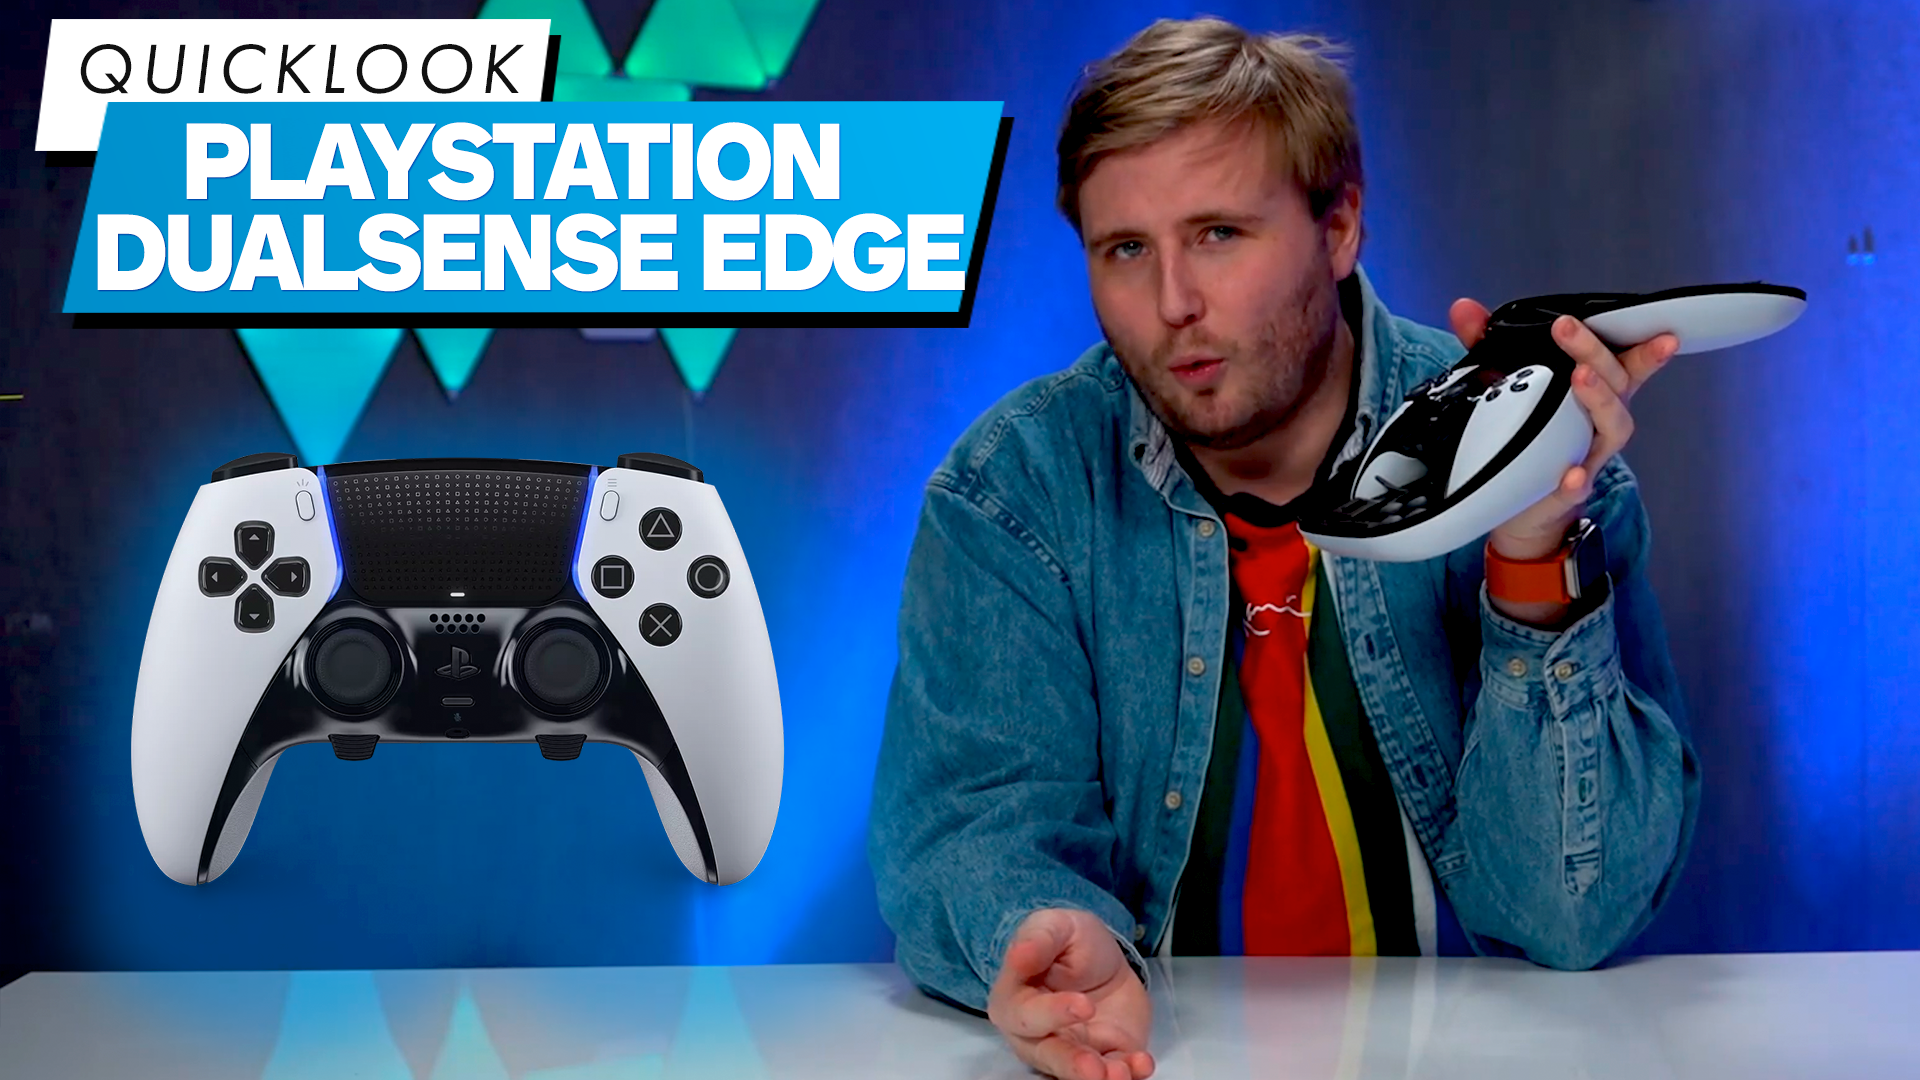 We tinkered with the new PlayStation DualSense Edge controller